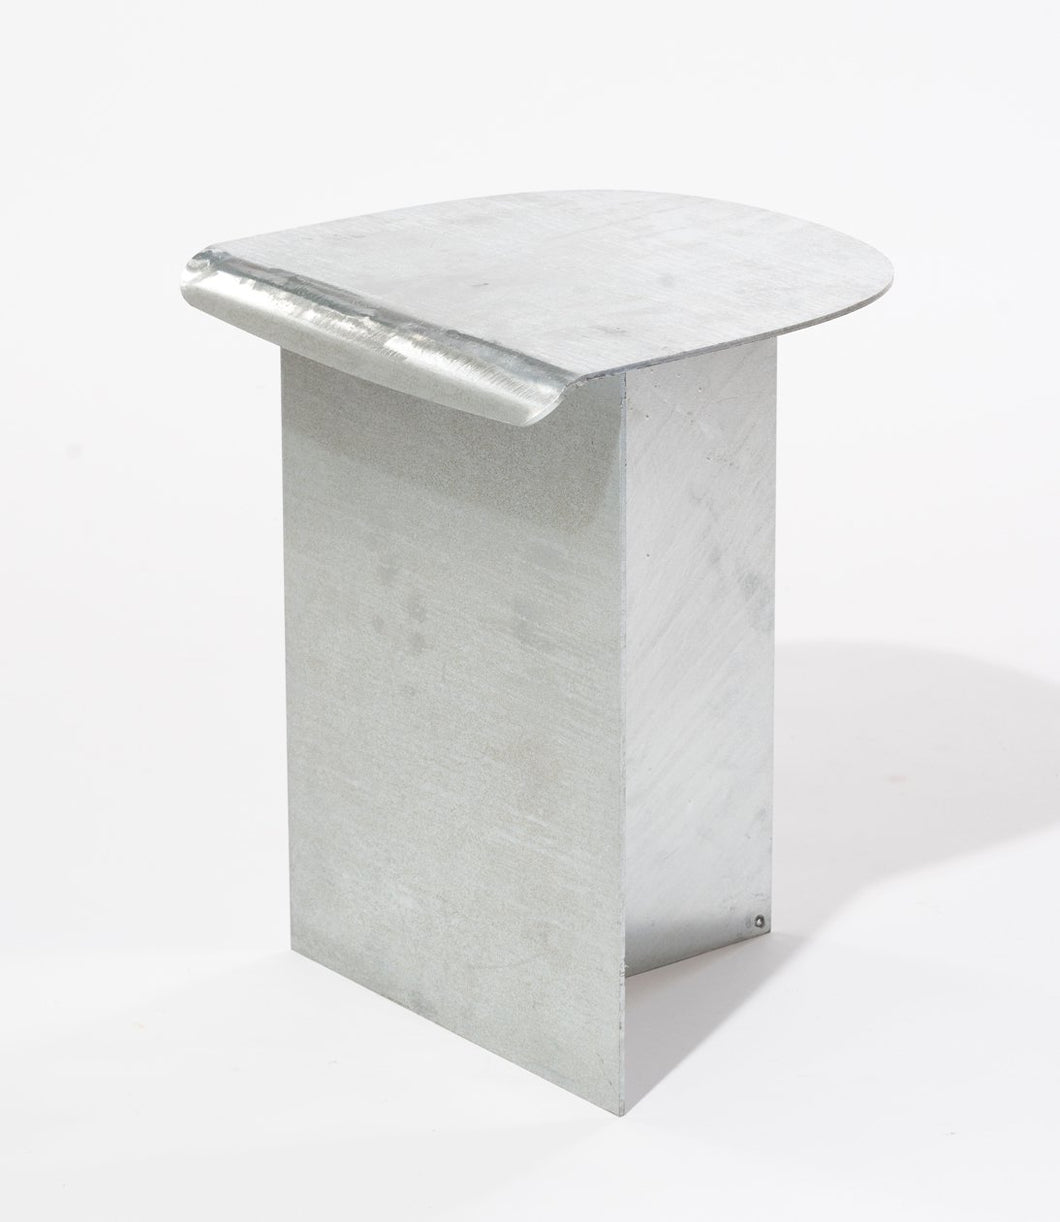 Limited edition Häfla stool by Form us with love for Häfla Bruk